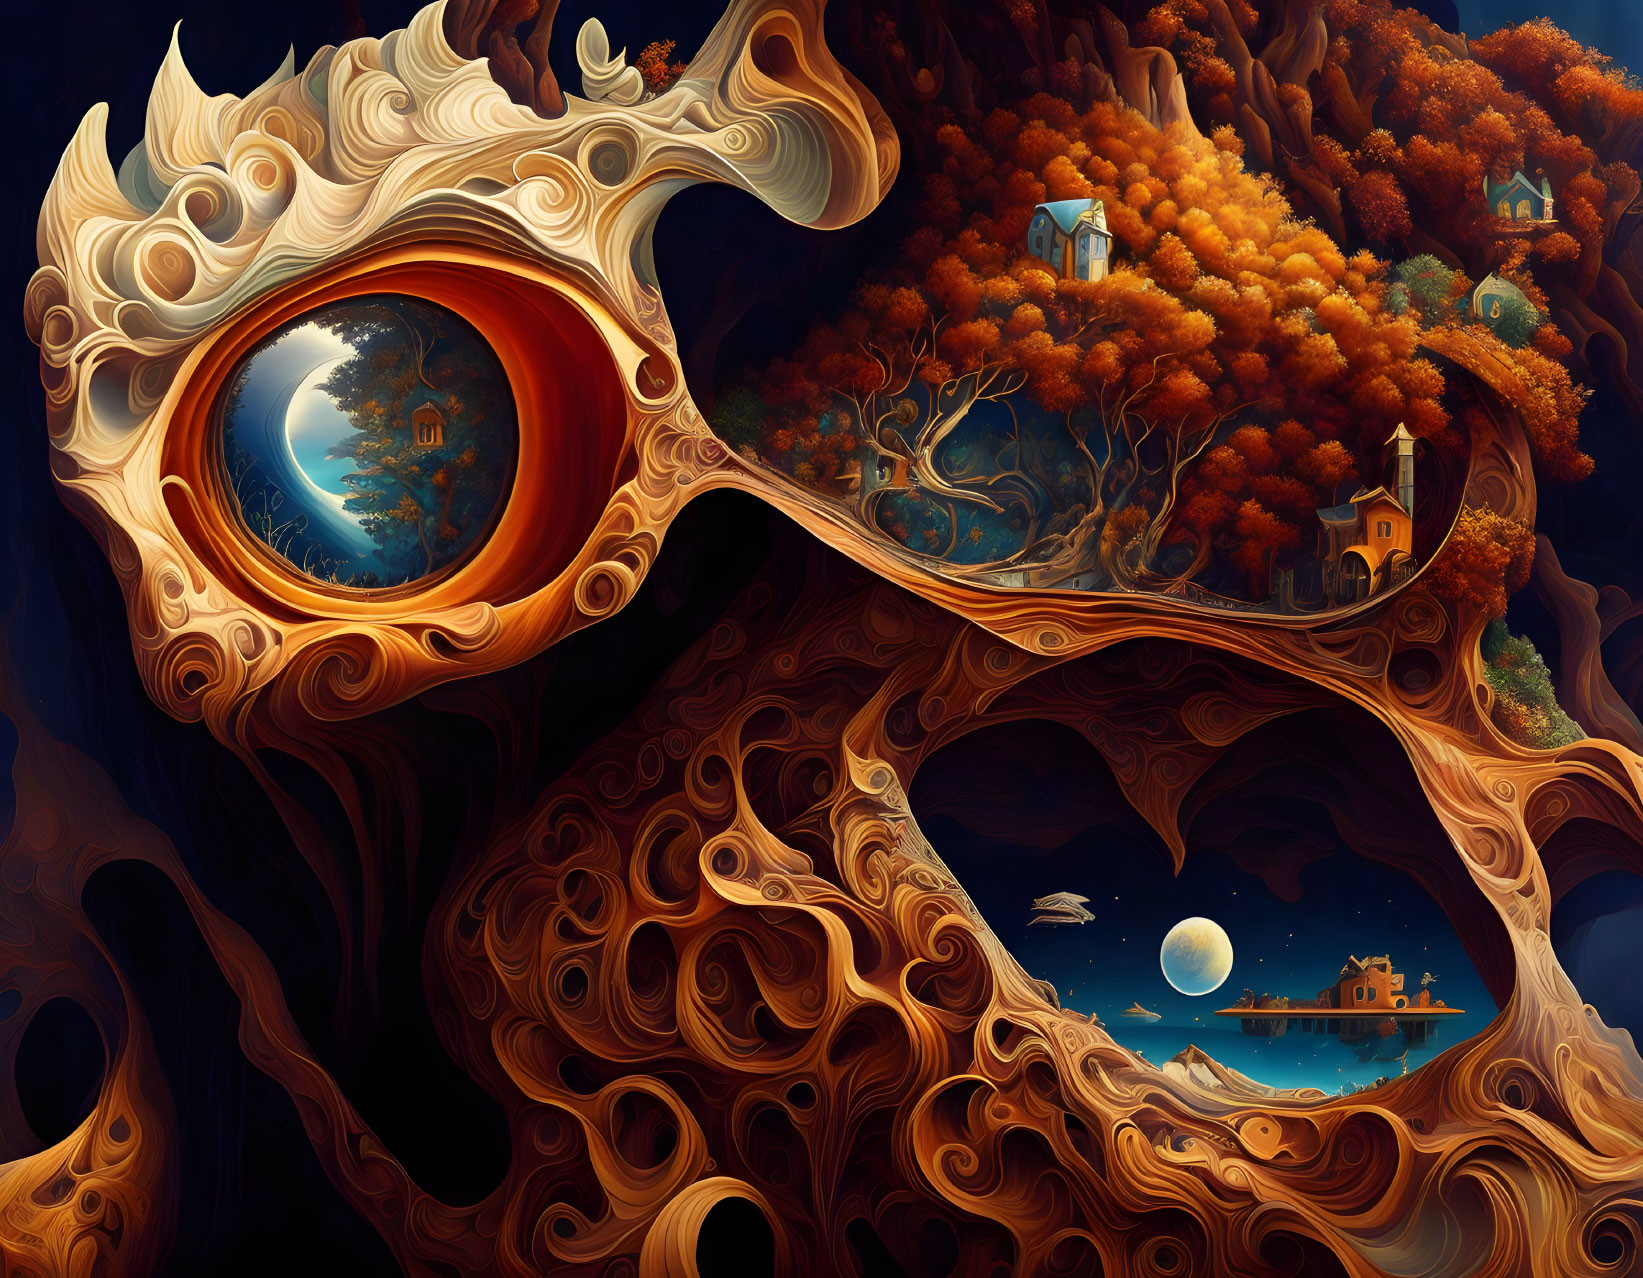 Fantastical landscape with swirling tree patterns and wood-textured eye